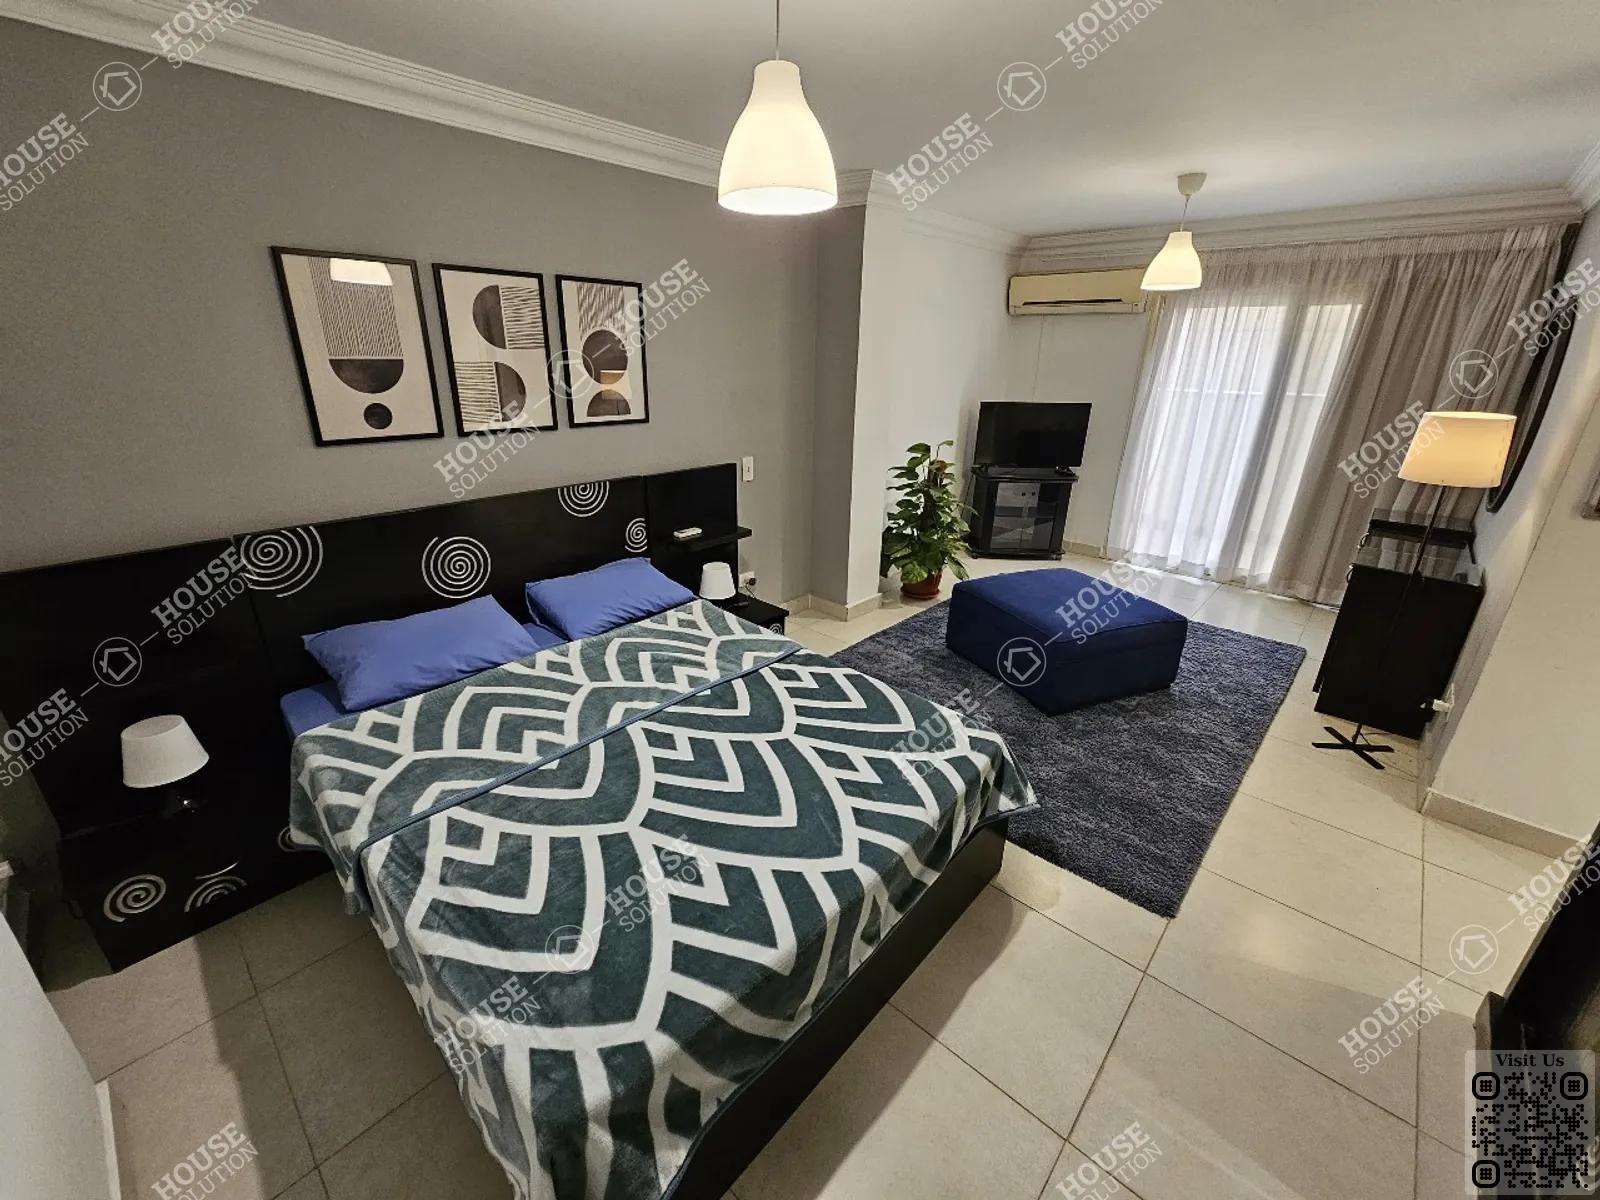 FIRST BEDROOM  @ Apartments For Rent In Maadi Maadi Degla Area: 125 m² consists of 2 Bedrooms 2 Bathrooms Modern furnished 5 stars #5871-2